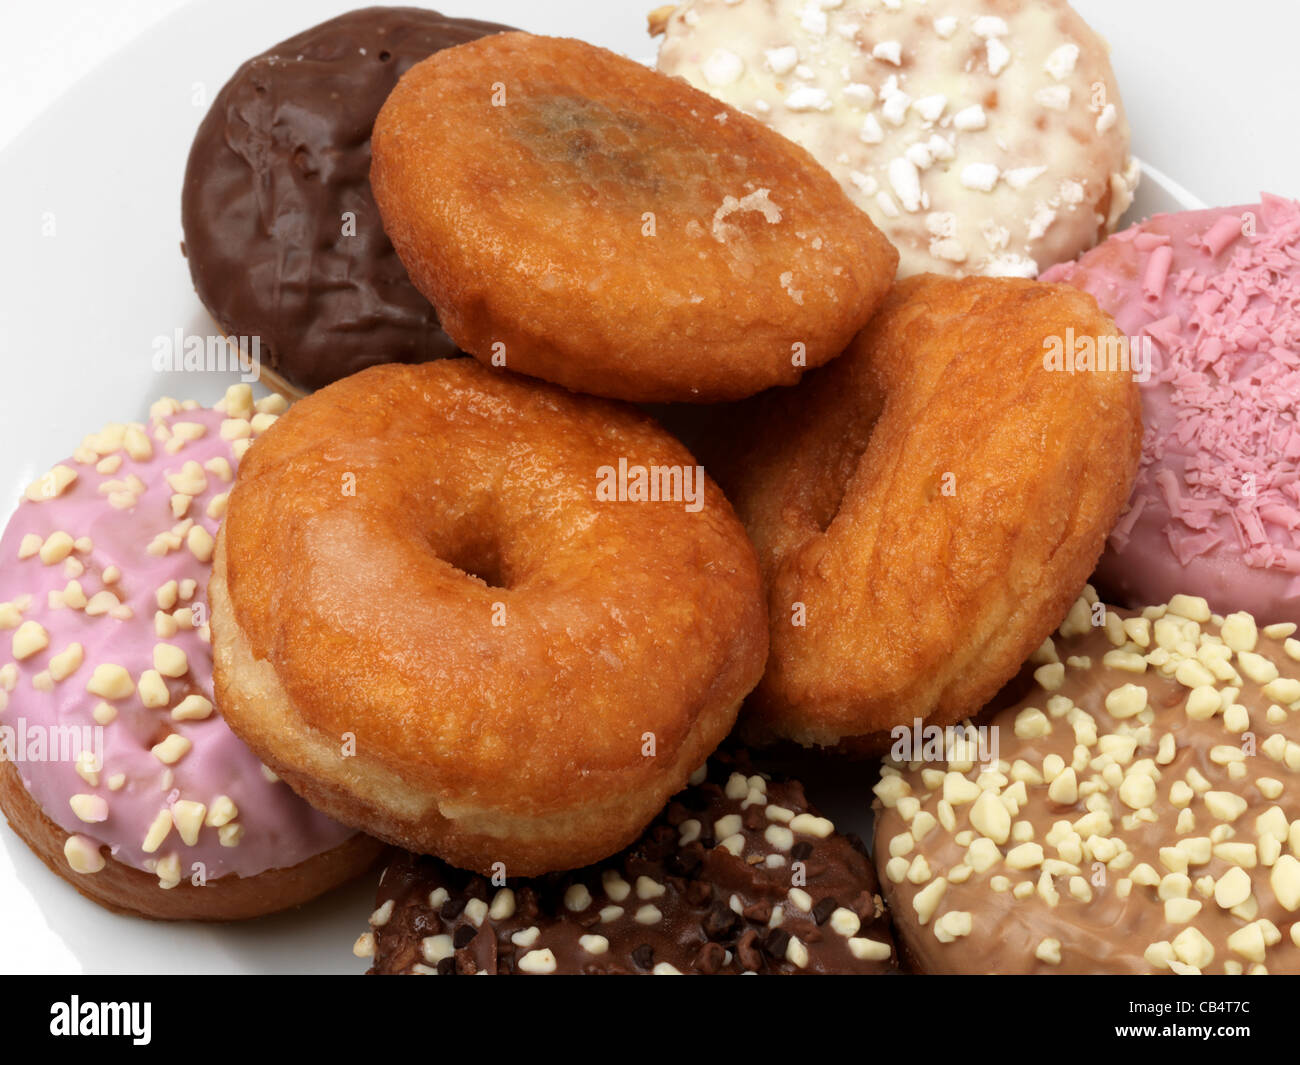 A Selection Of Doughnuts Some With Holes In Others With Jam And Icing Stock Photo